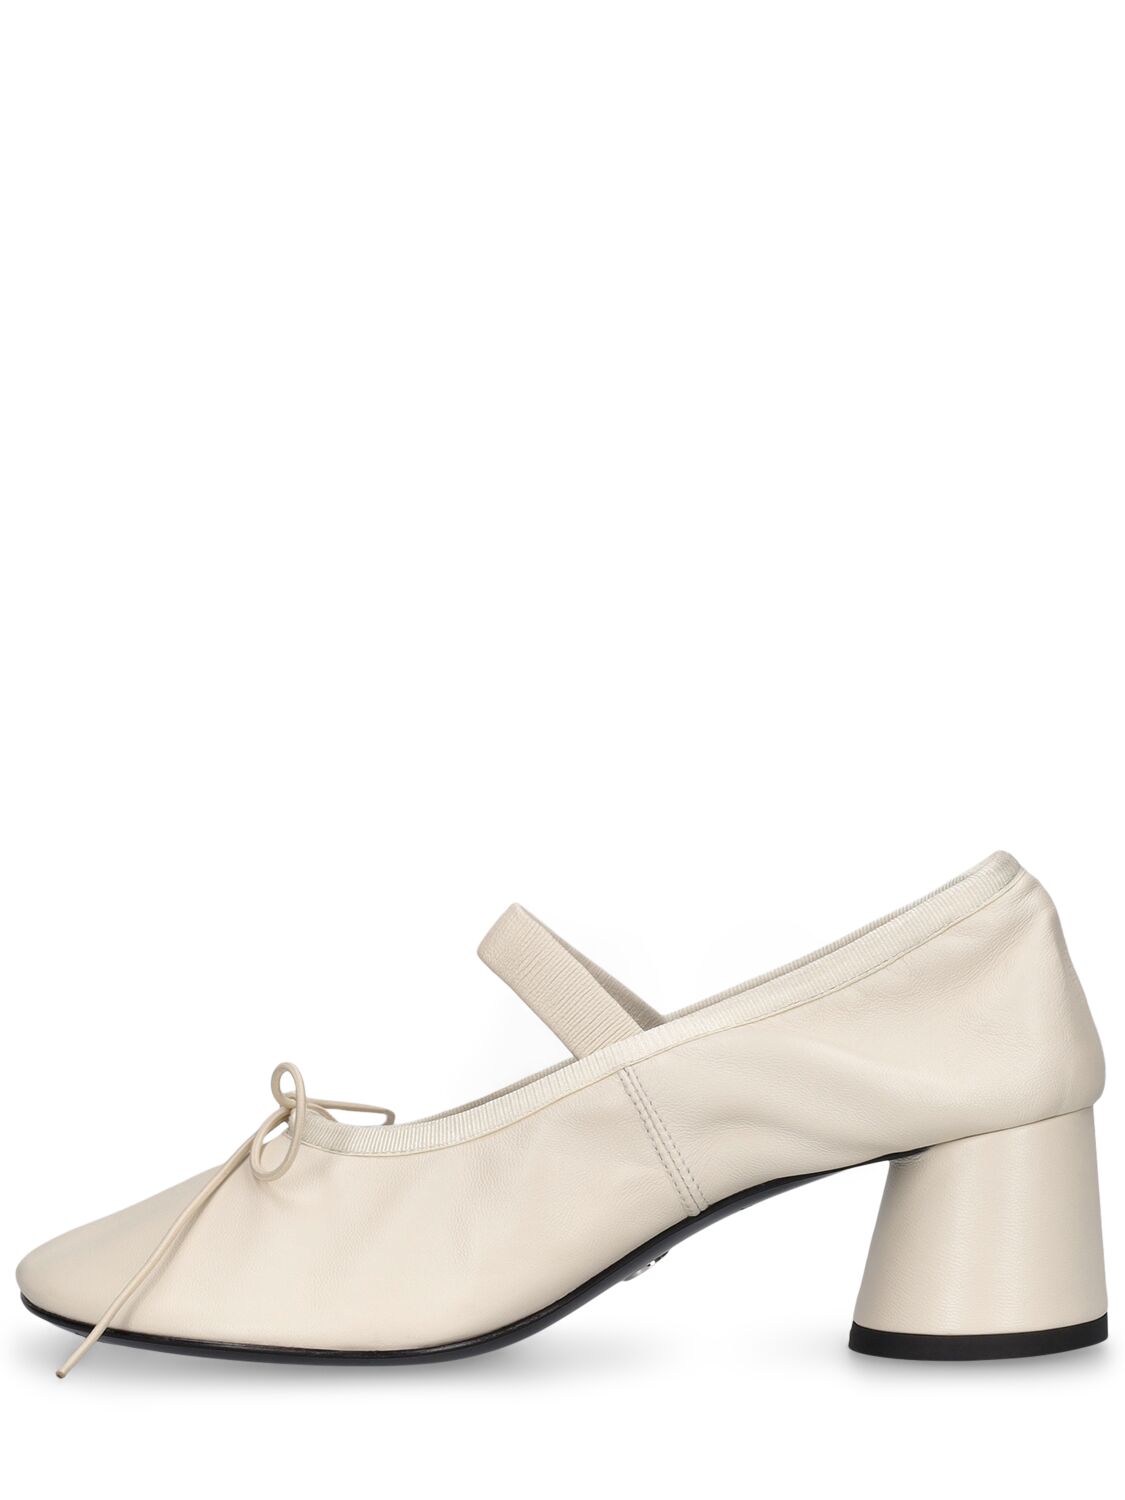 Proenza Schouler 55mm Glove Leather Mary Jane Pumps In Neutral